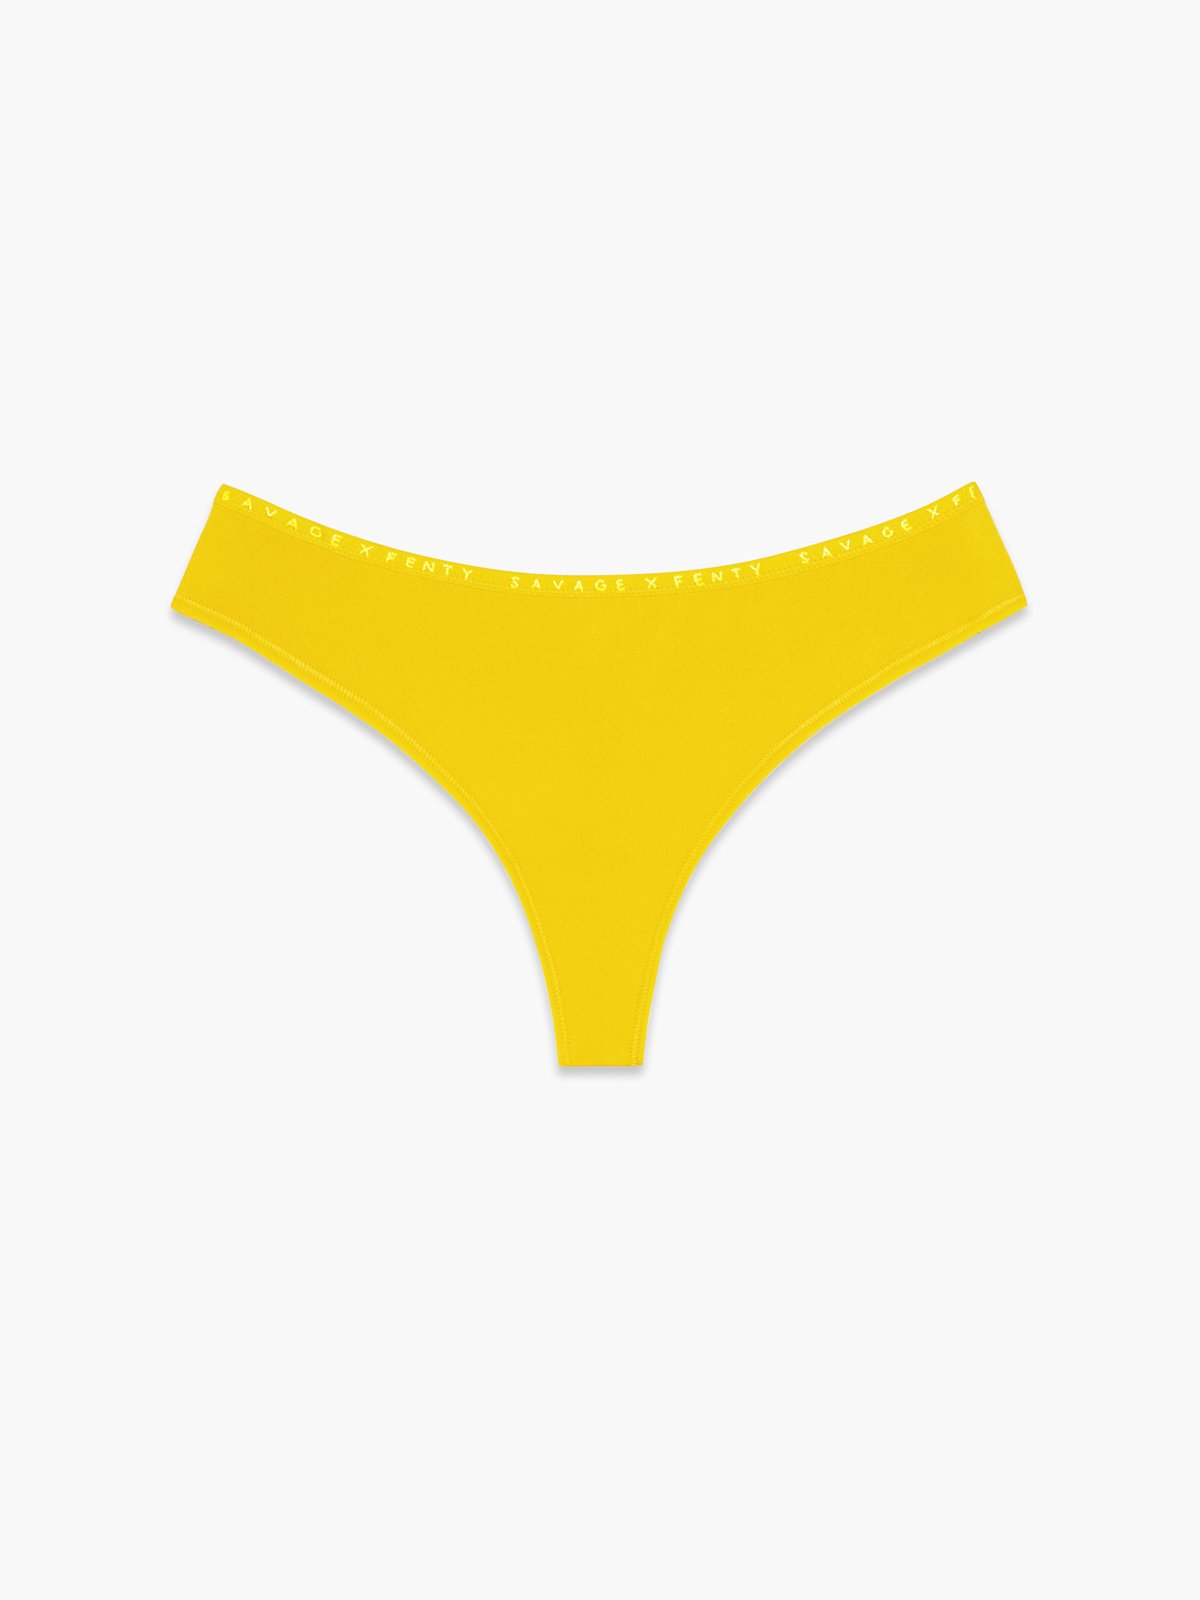 NEW Microfiber Thong Panty in Gold & Yellow